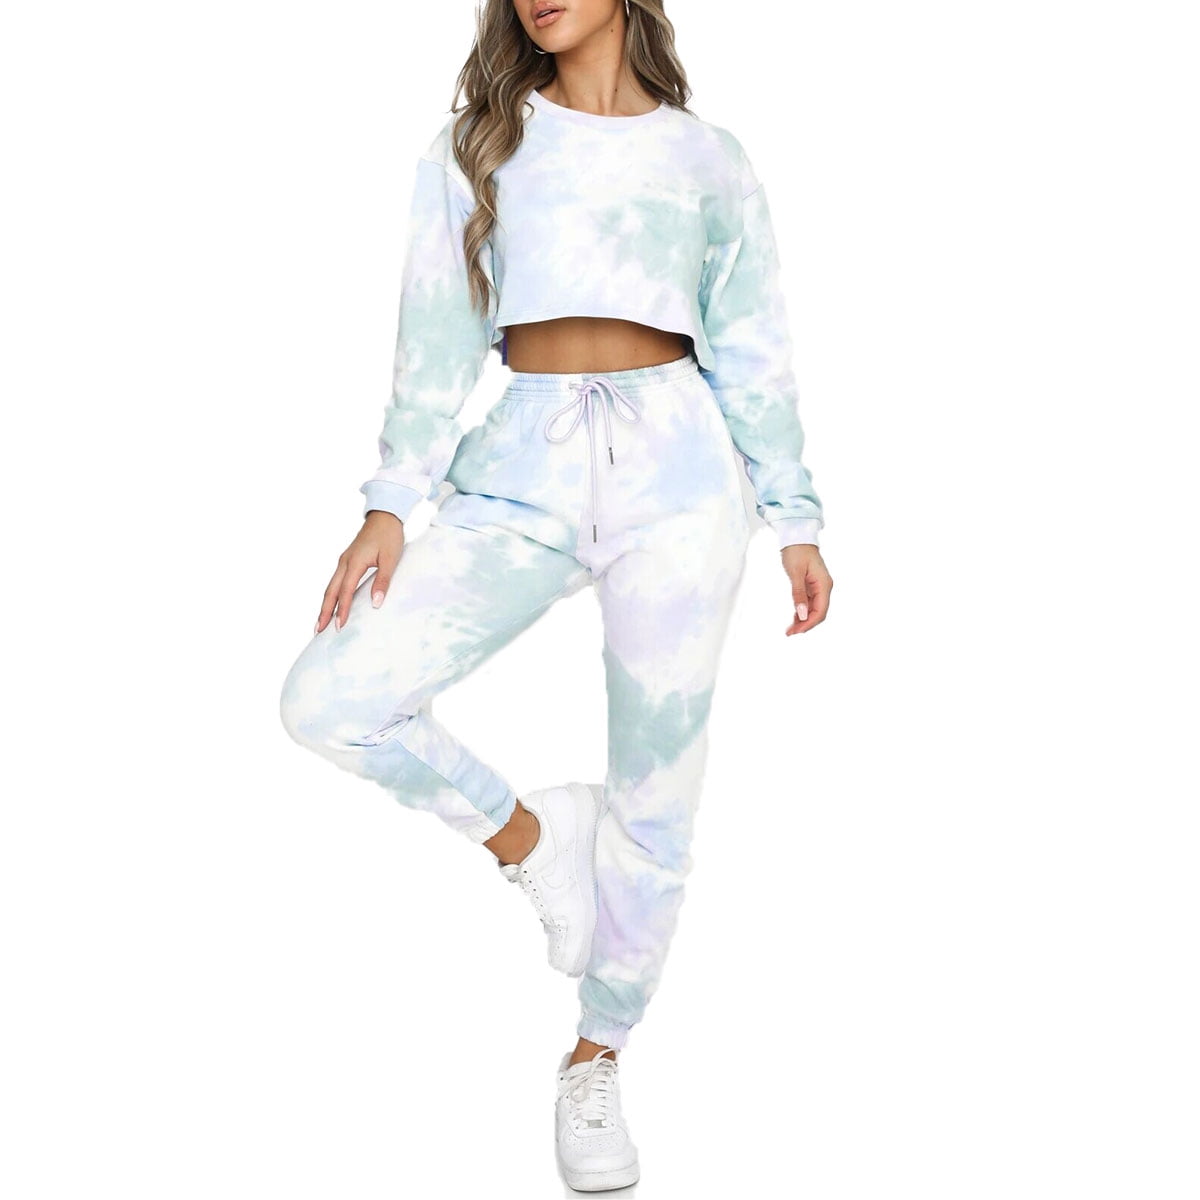 TOLENY Womens 2 Piece Tie Dye Print Sweatsuit Set Long Sleeve Pullover and Drawstring Sweatpants Sets 